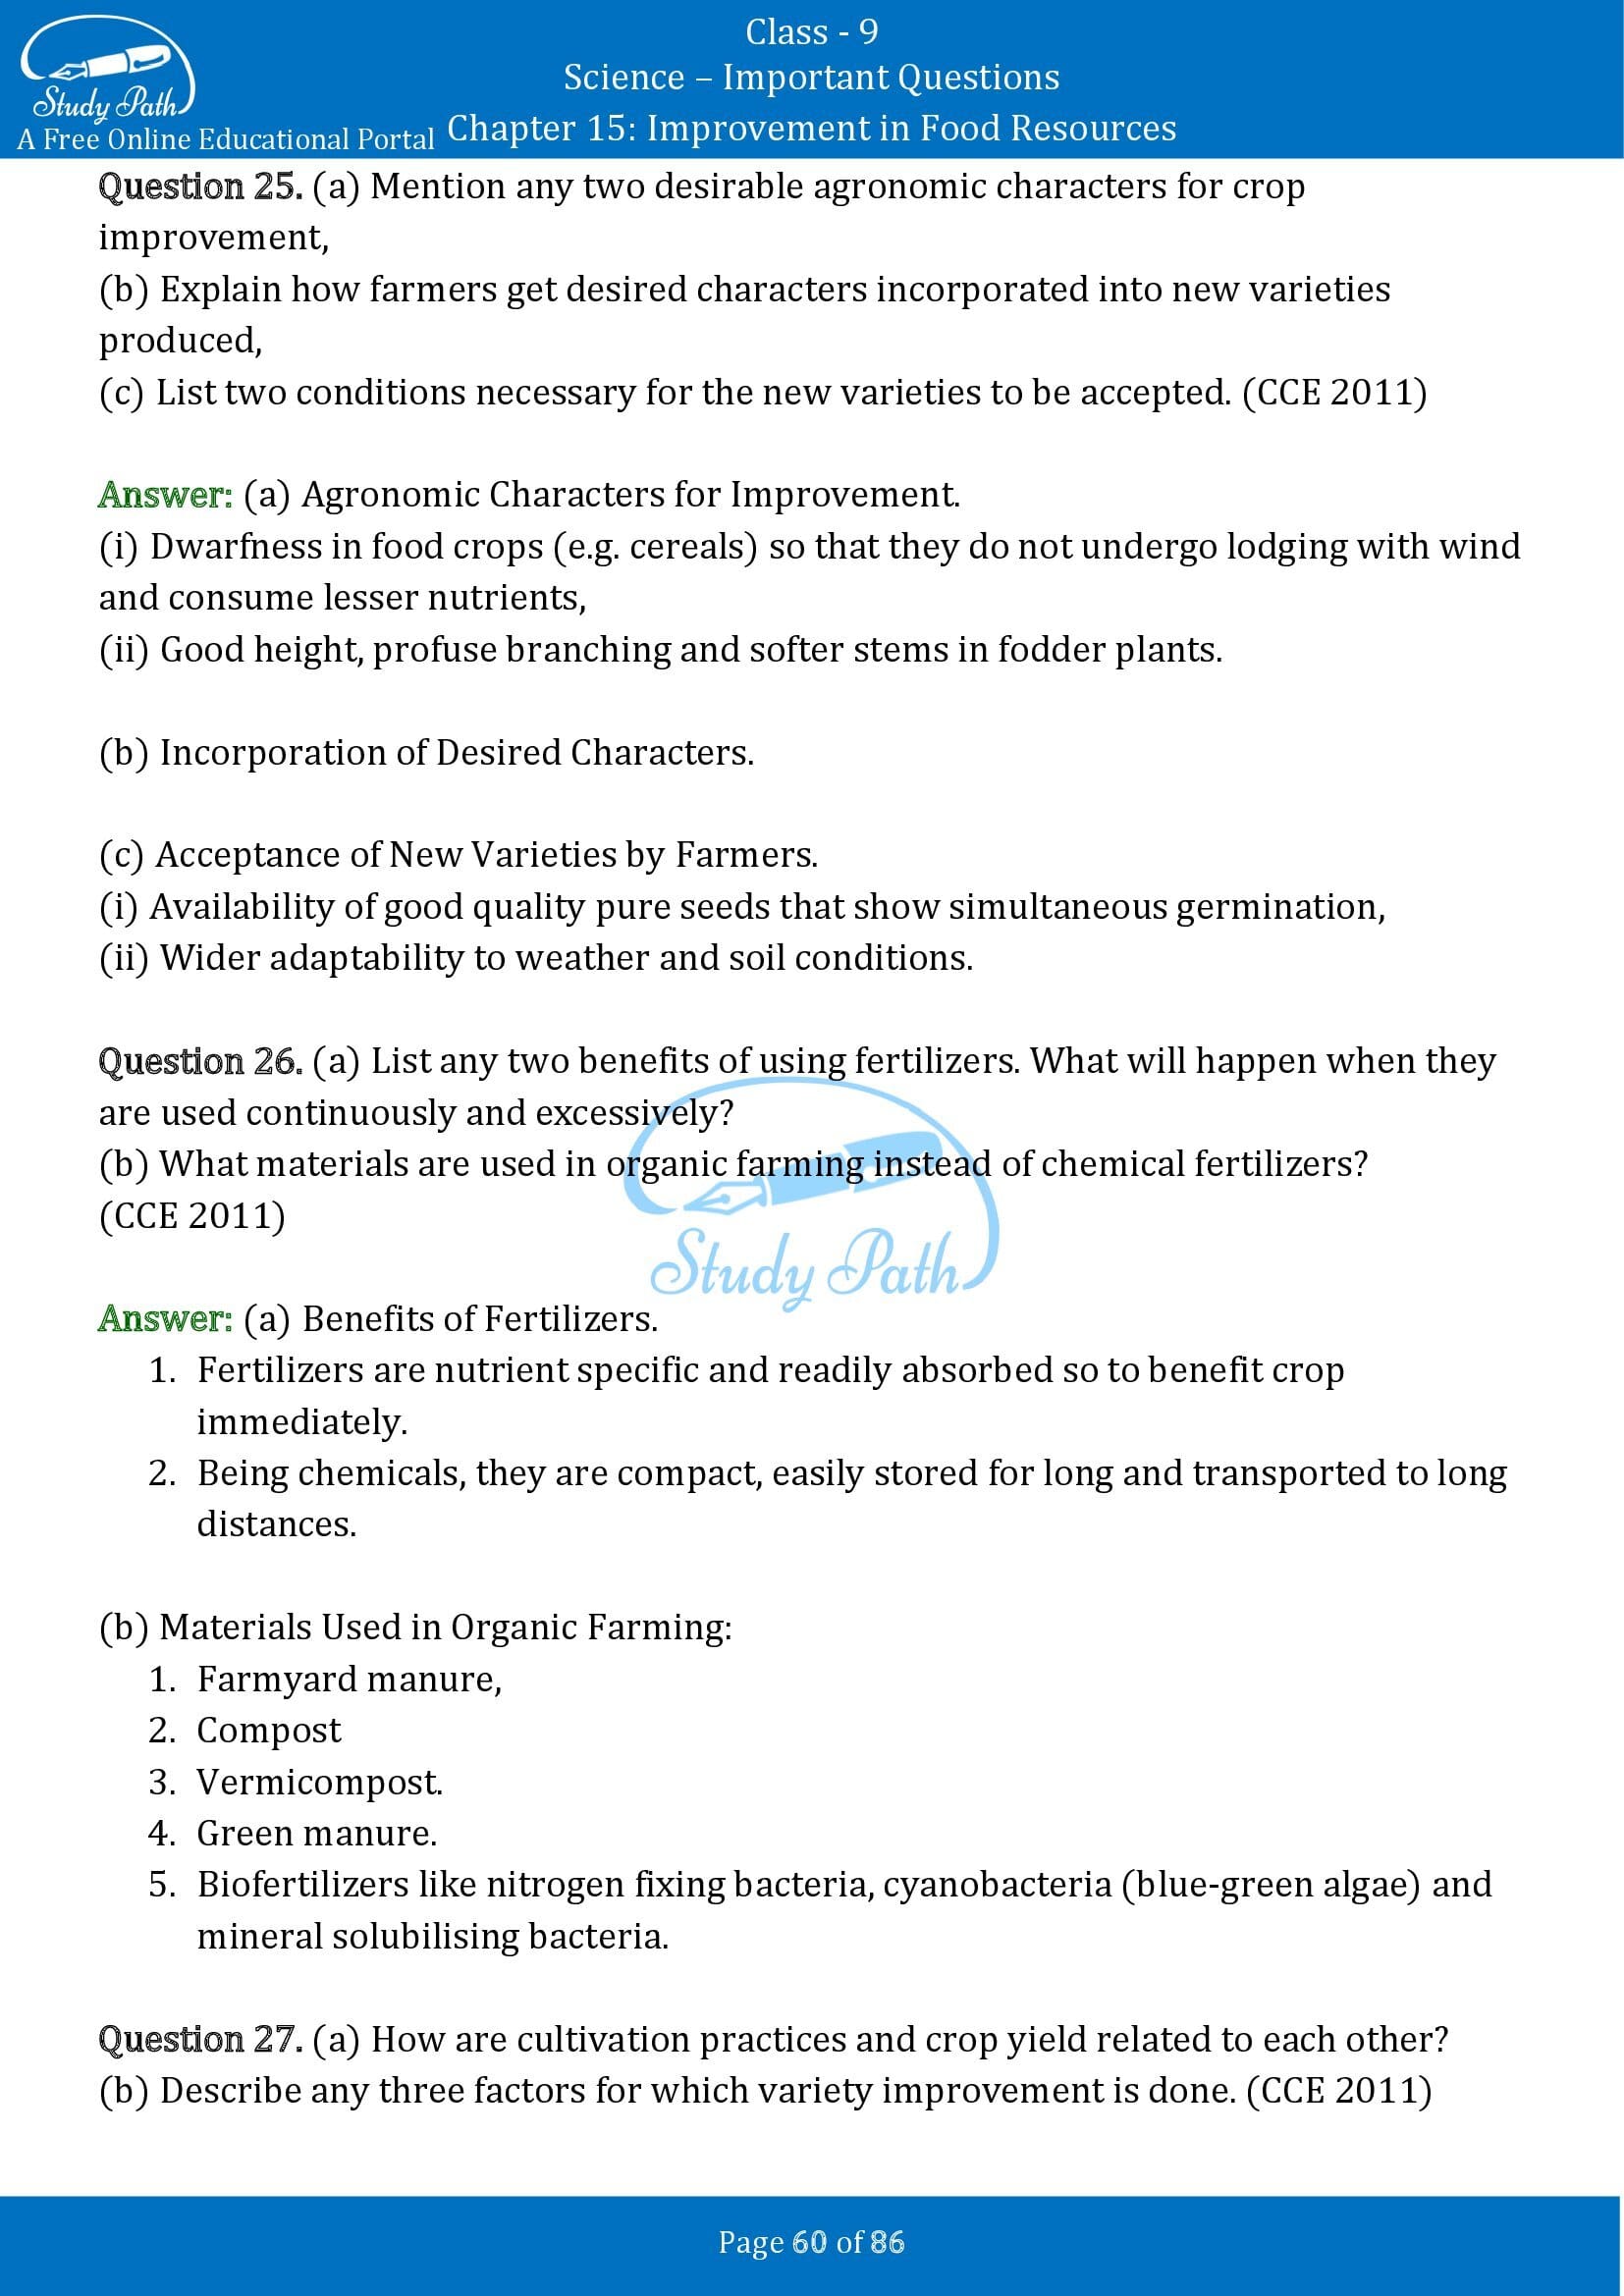 Important Questions for Class 9 Science Chapter 15 Improvement in Food Resources 00060